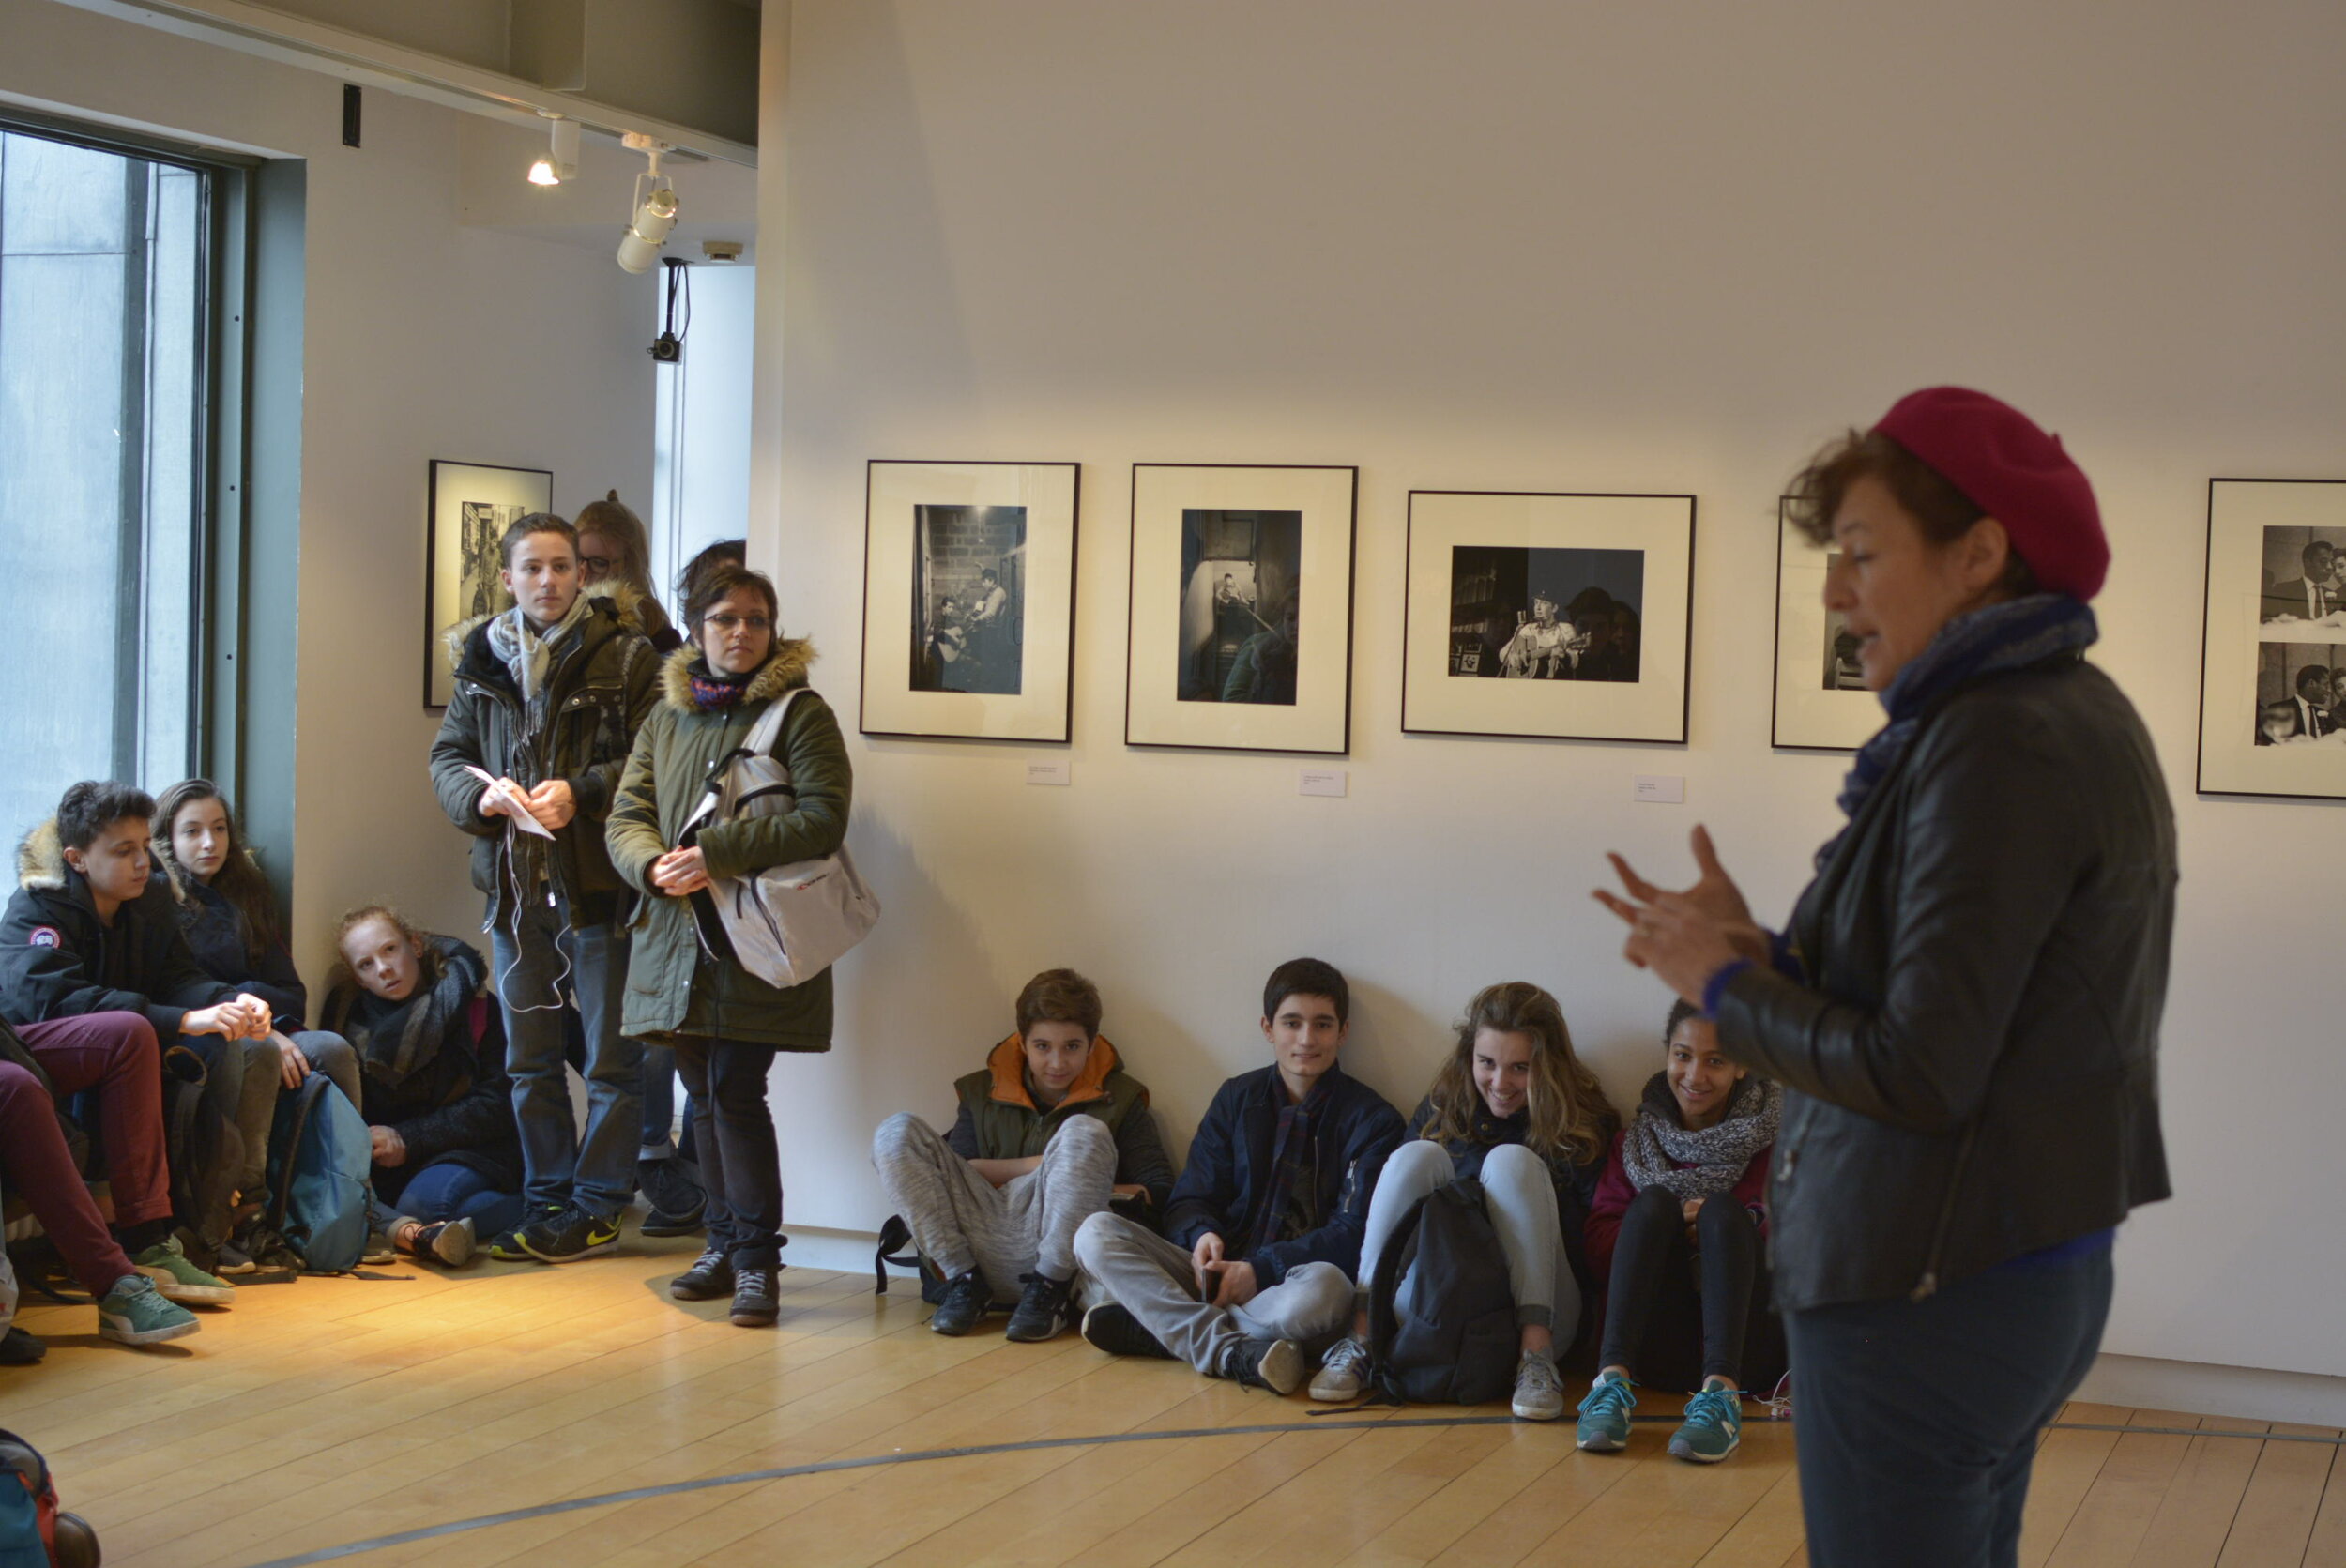  Curator Tanya Kiang giving a talk on the exhibition 